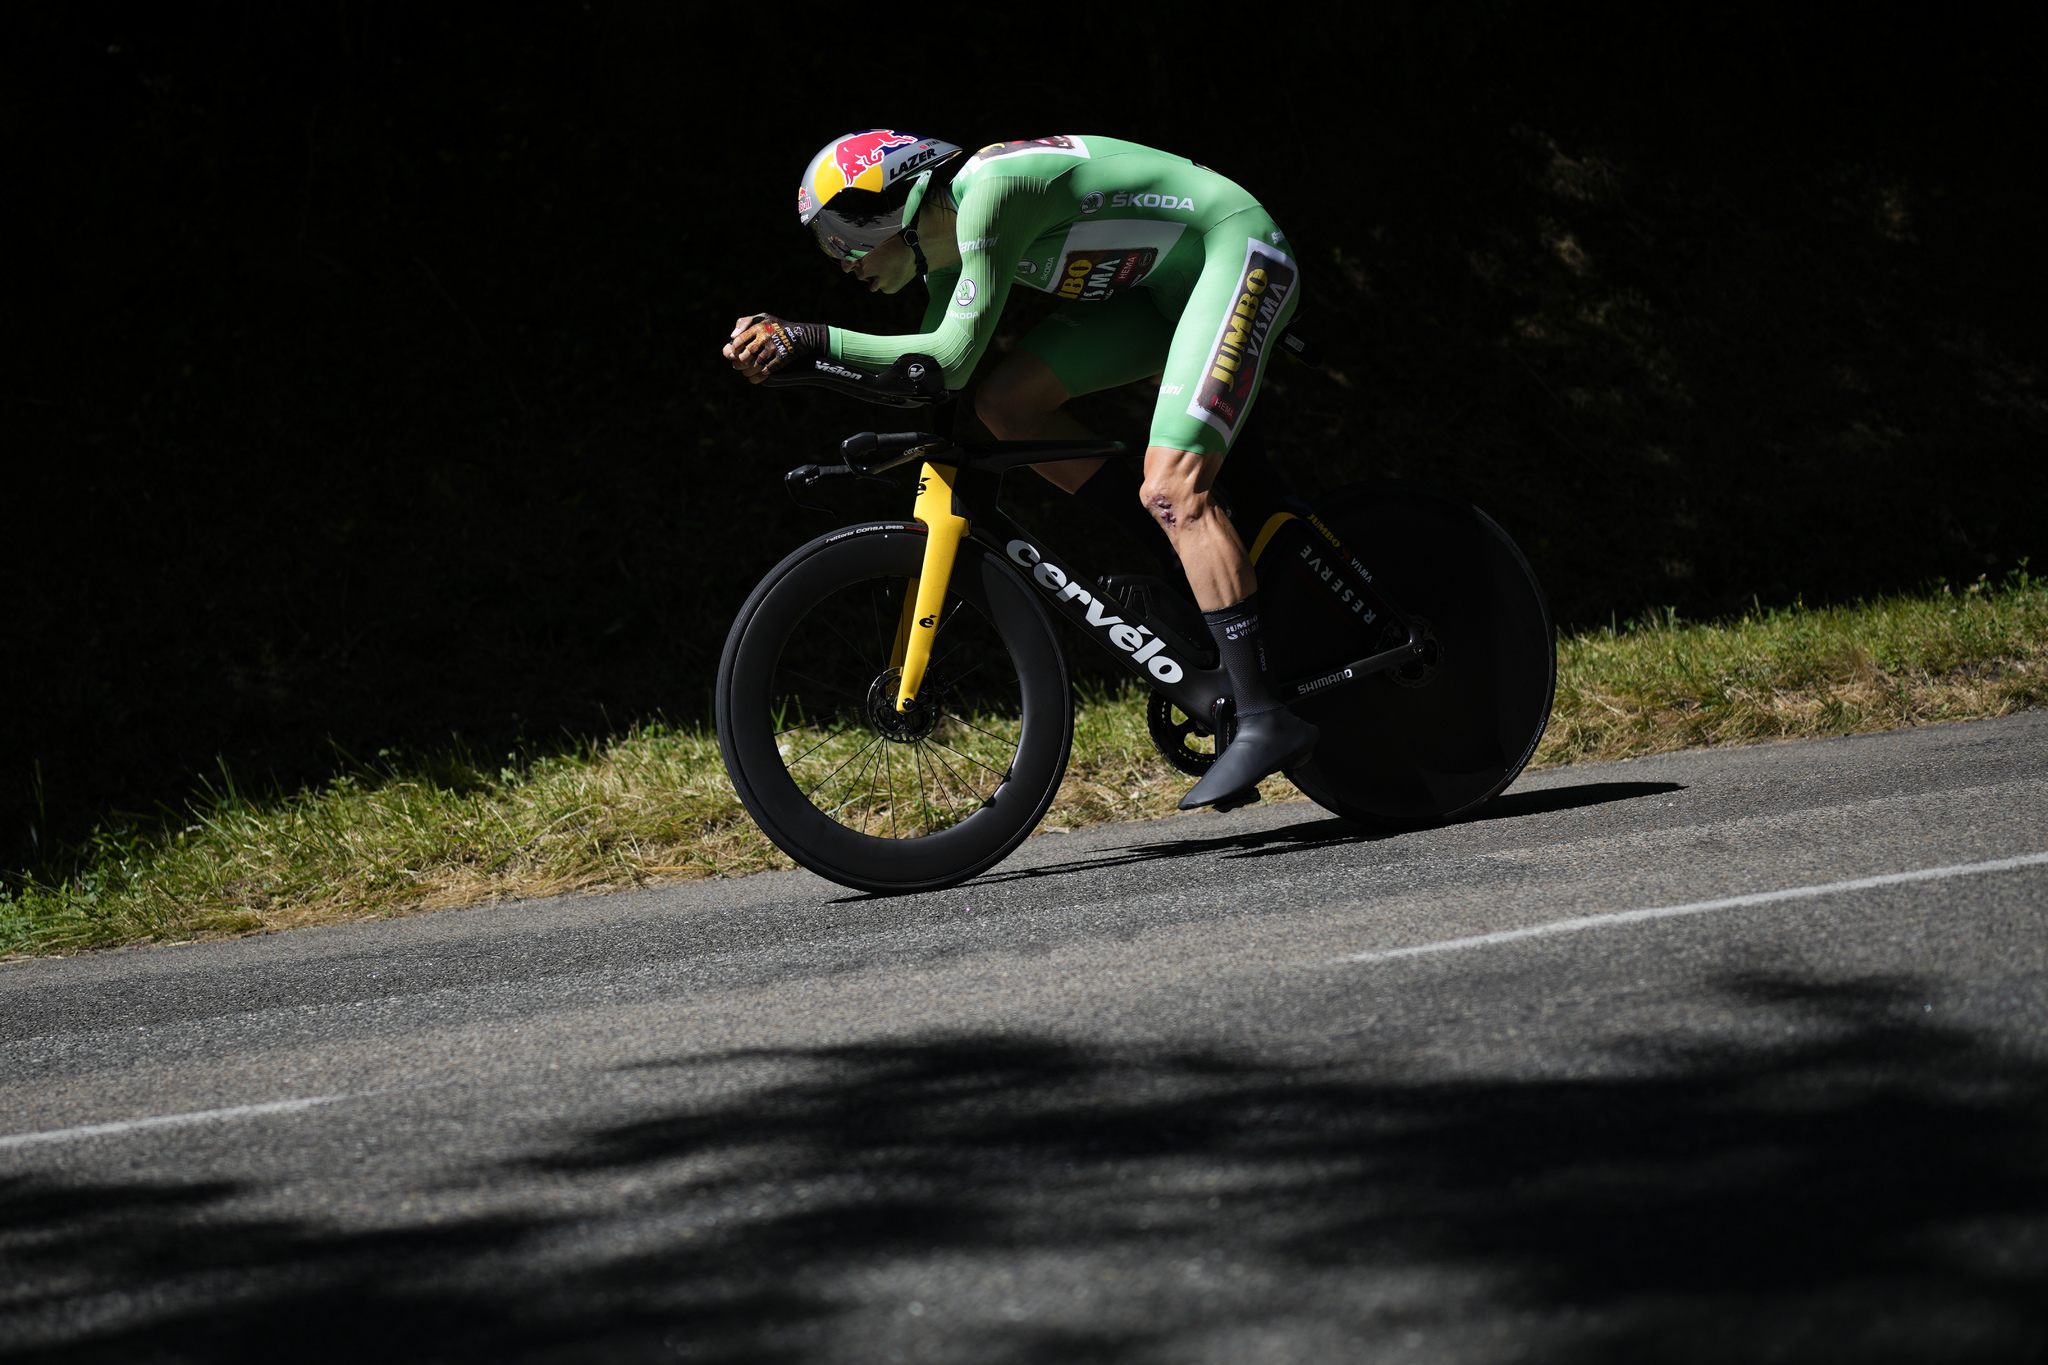 Belgium's Wout  lt;HIT gt;Van lt;/HIT gt;  lt;HIT gt;Aert lt;/HIT gt;, wearing the best sprinter's green jersey, rides during the twentieth stage of the Tour de France cycling race, an individual time trial over 40.7 kilometers (25.3 miles) with start in Lacapelle-Marival and finish in Rocamadour, France, Saturday, July 23, 2022. (AP Photo/Daniel Cole)